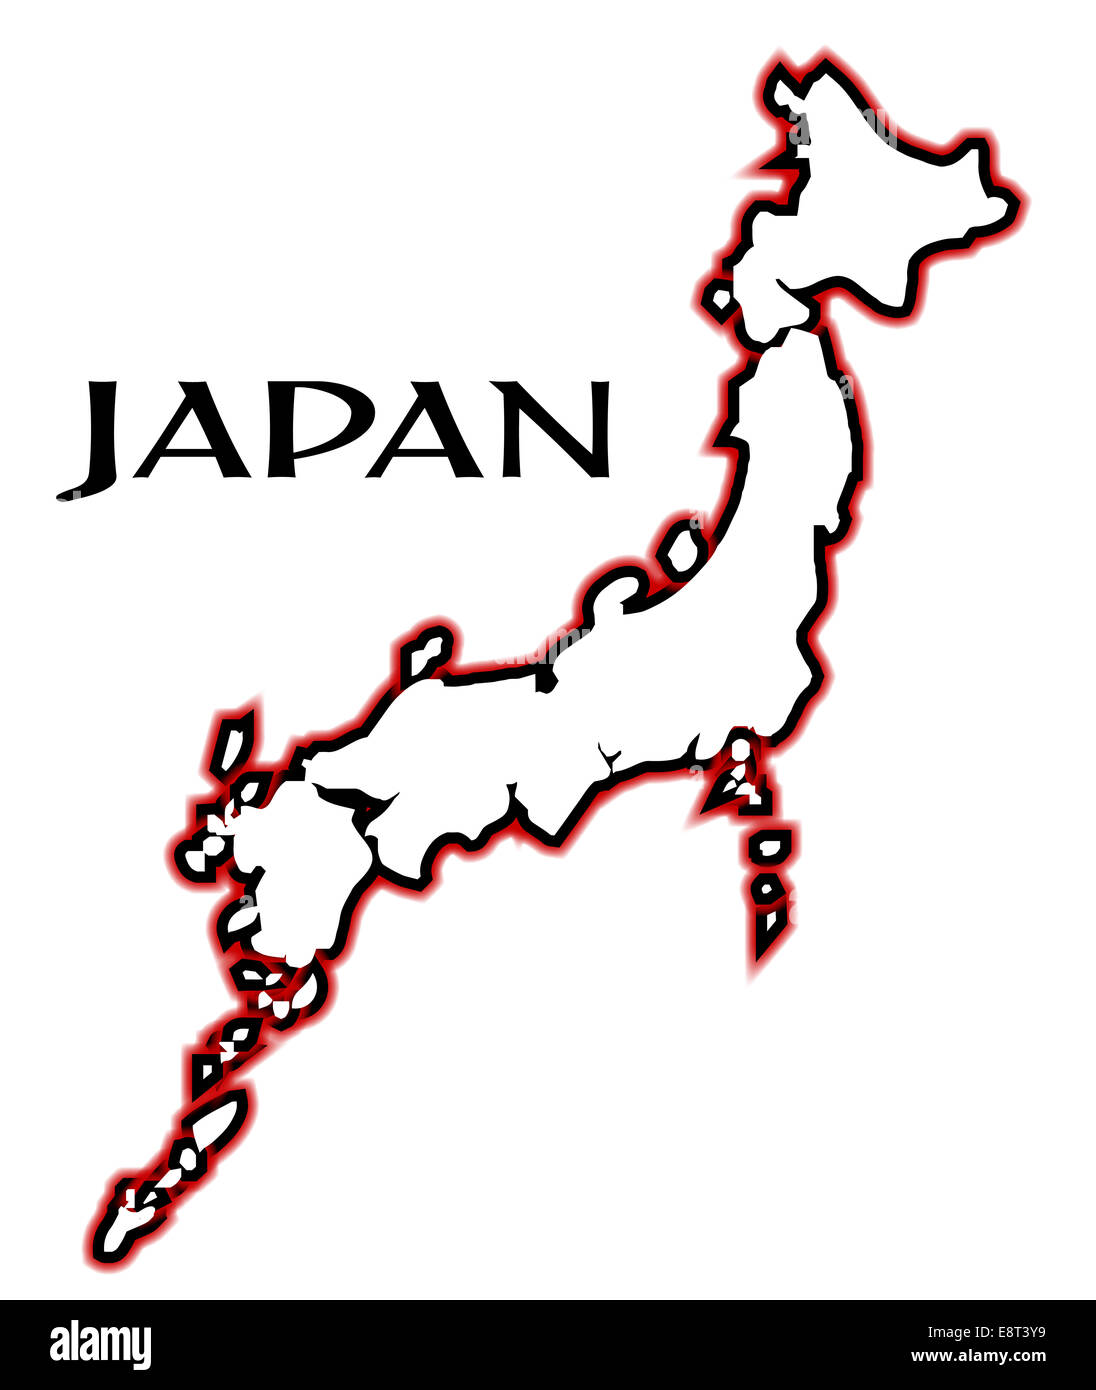 Outline map of Japan isolated over a white background Stock Photo